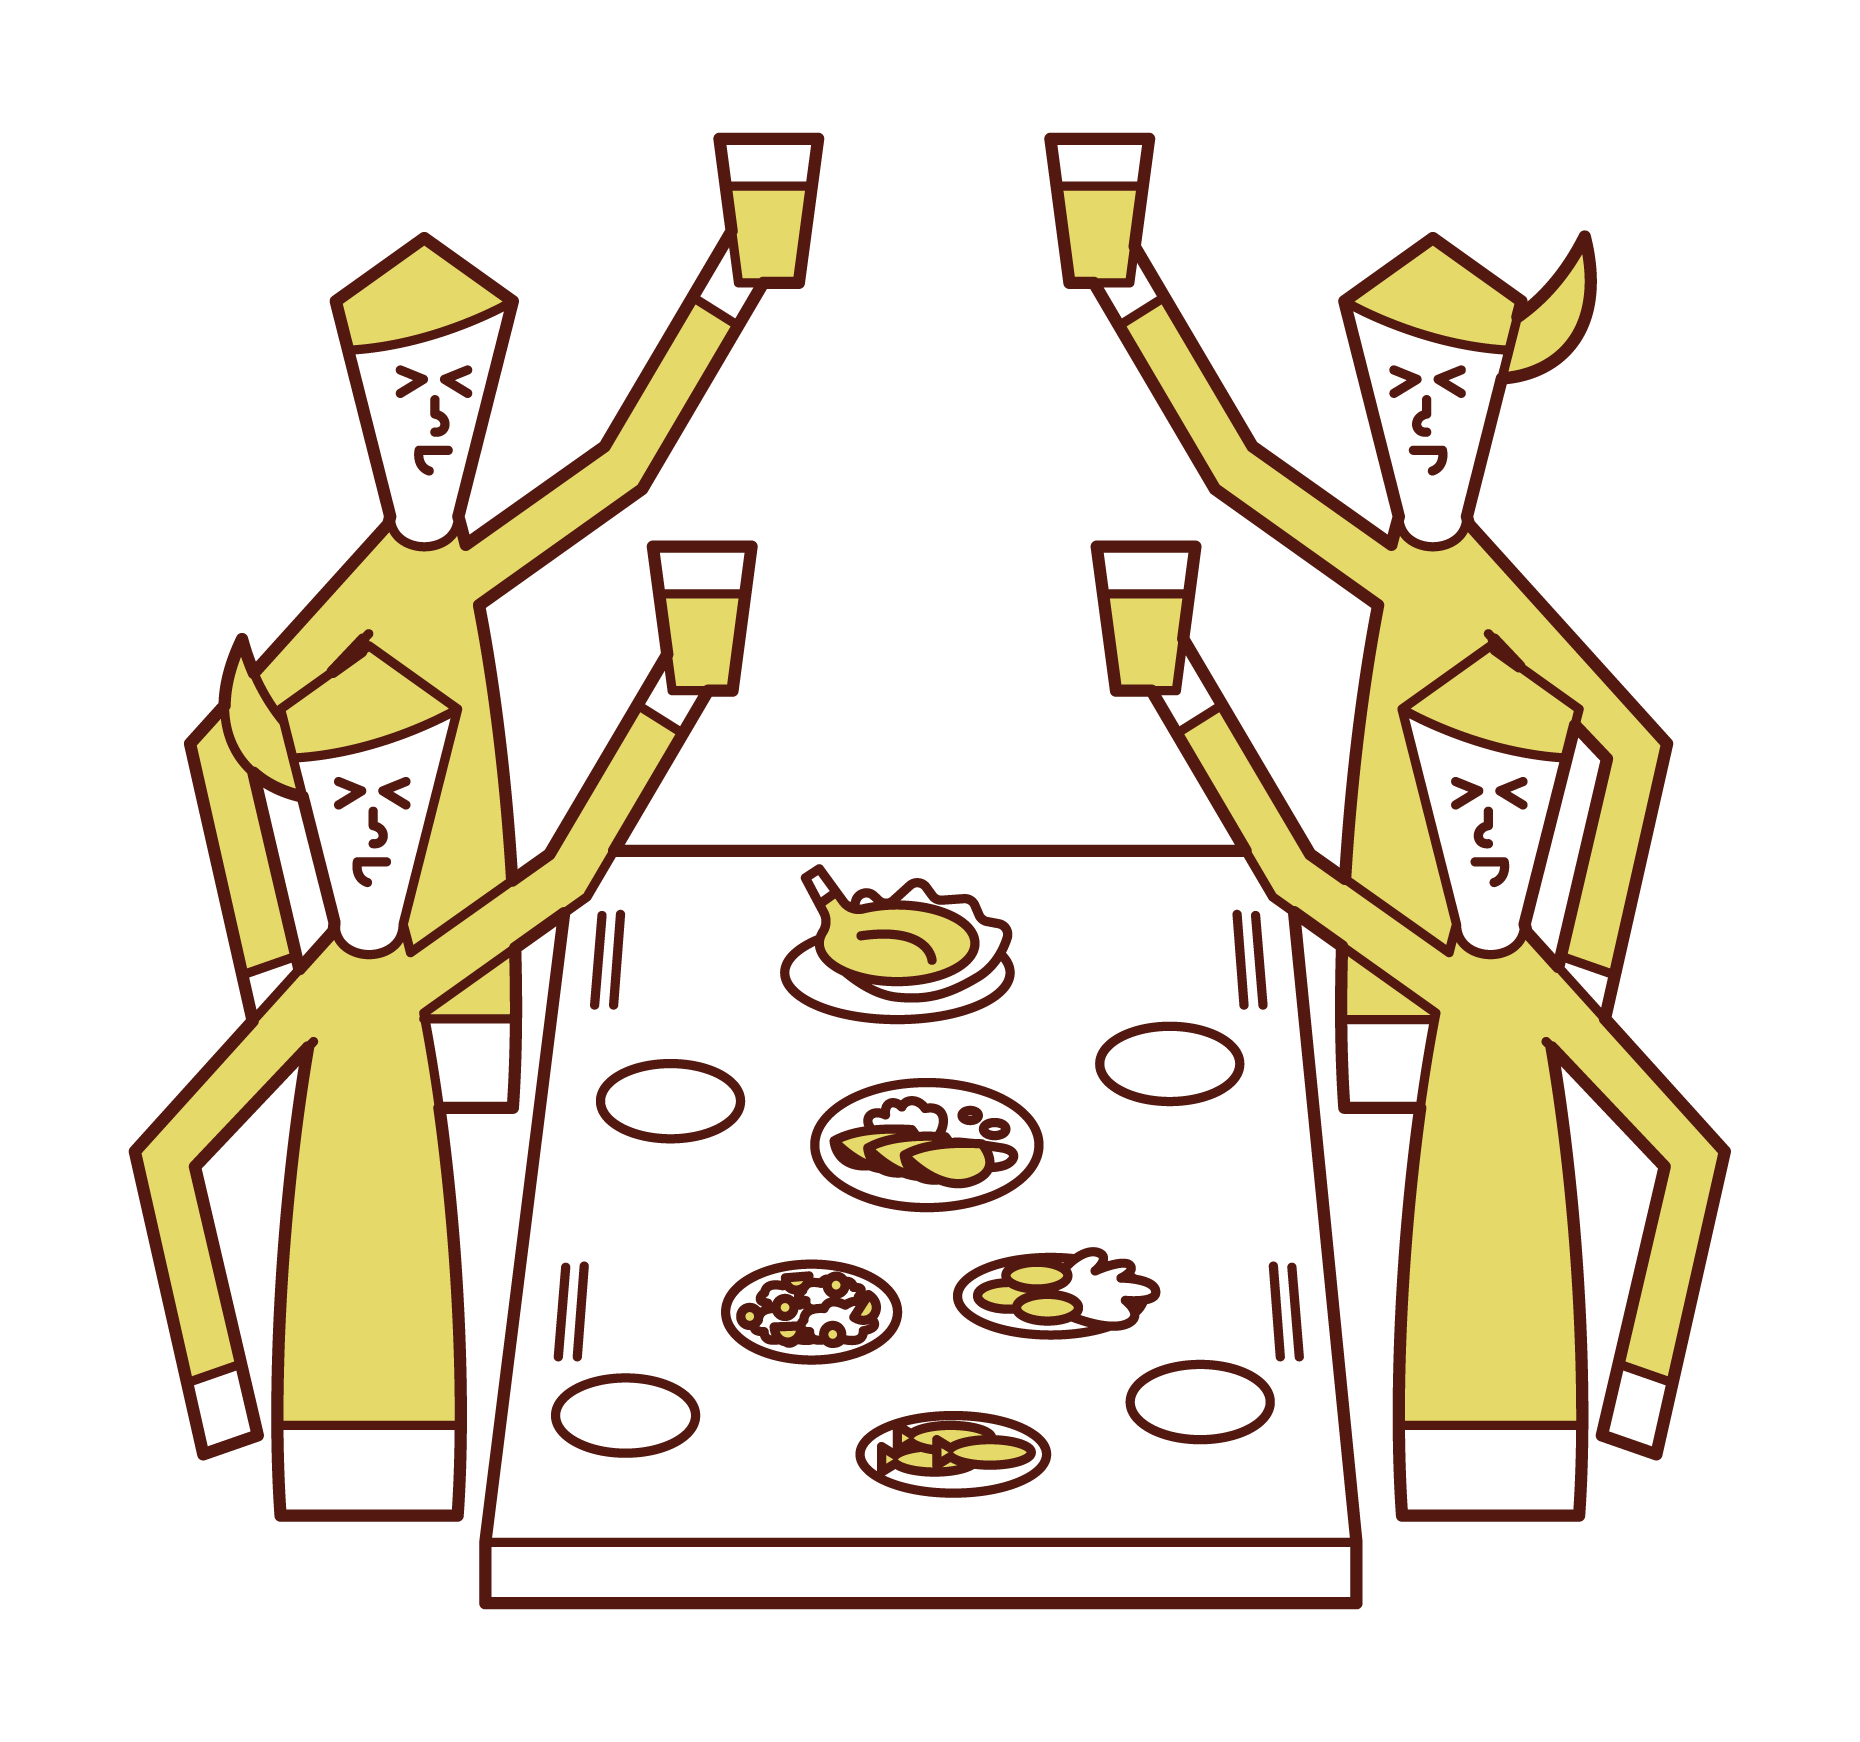 Illustration of people (men and women) toasting at a dinner party